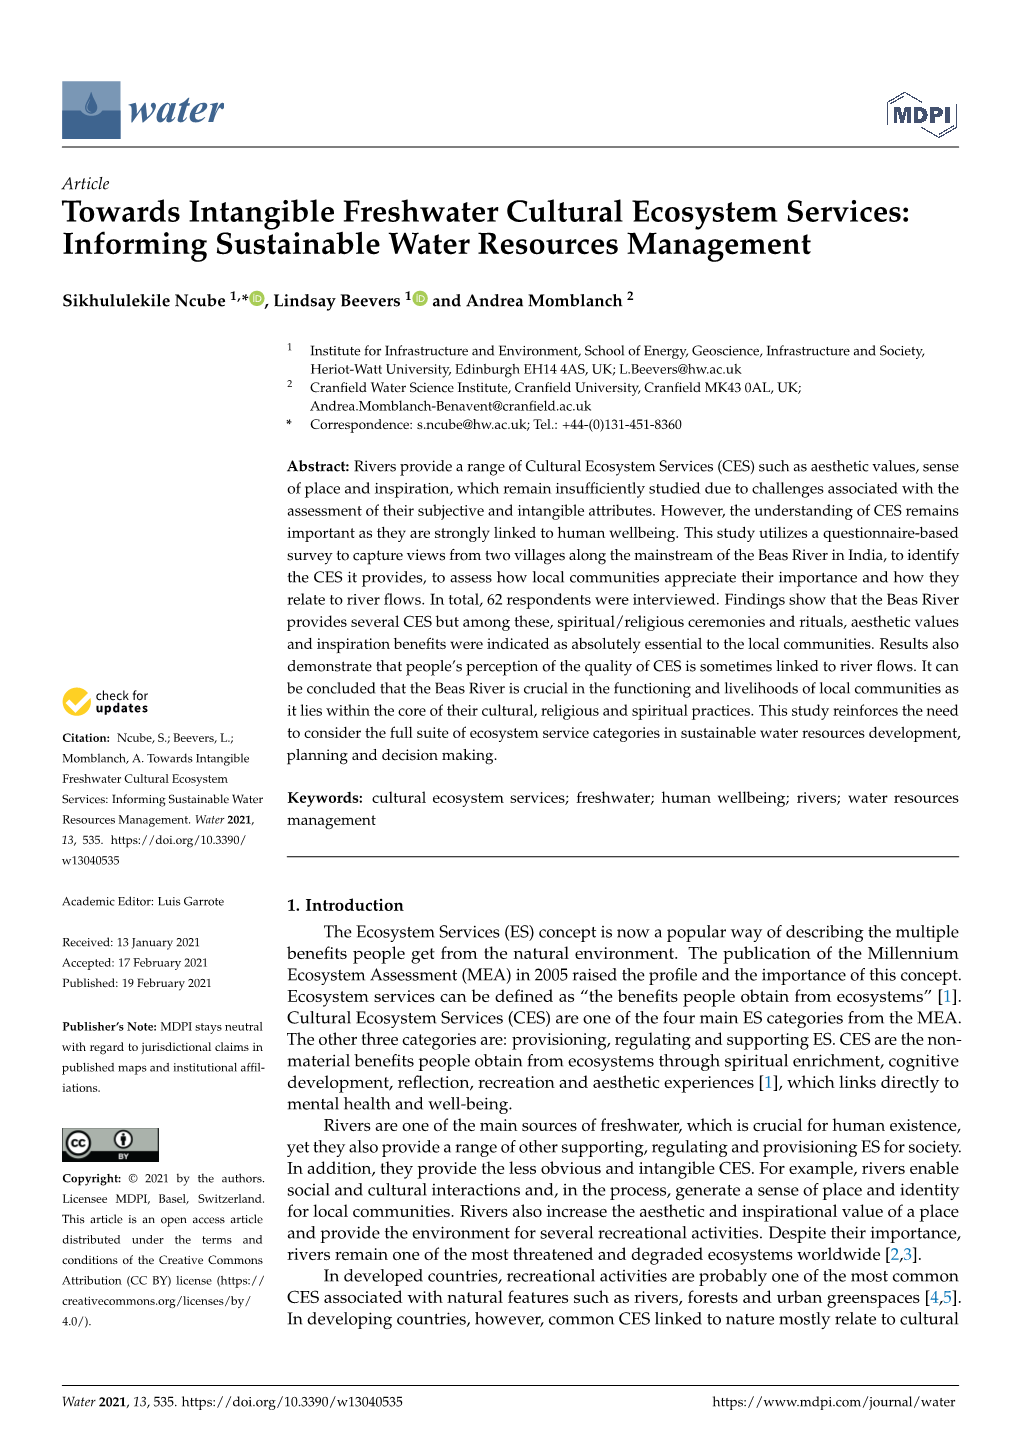 Towards Intangible Freshwater Cultural Ecosystem Services: Informing Sustainable Water Resources Management